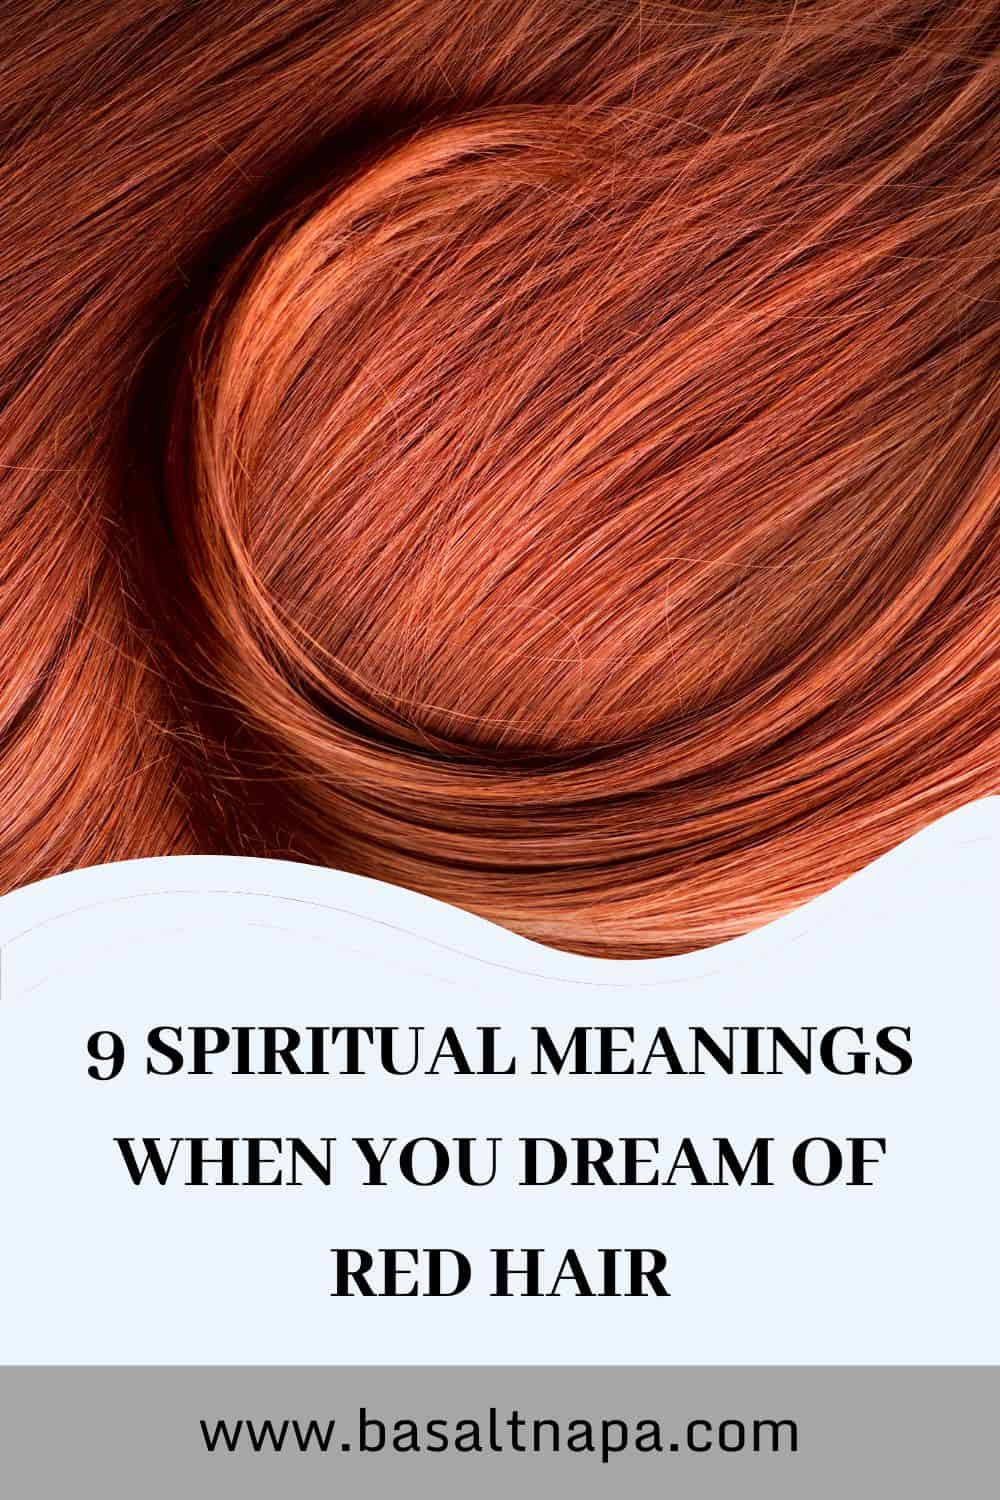 Common Themes Associated With Dreams Of Dying Hair